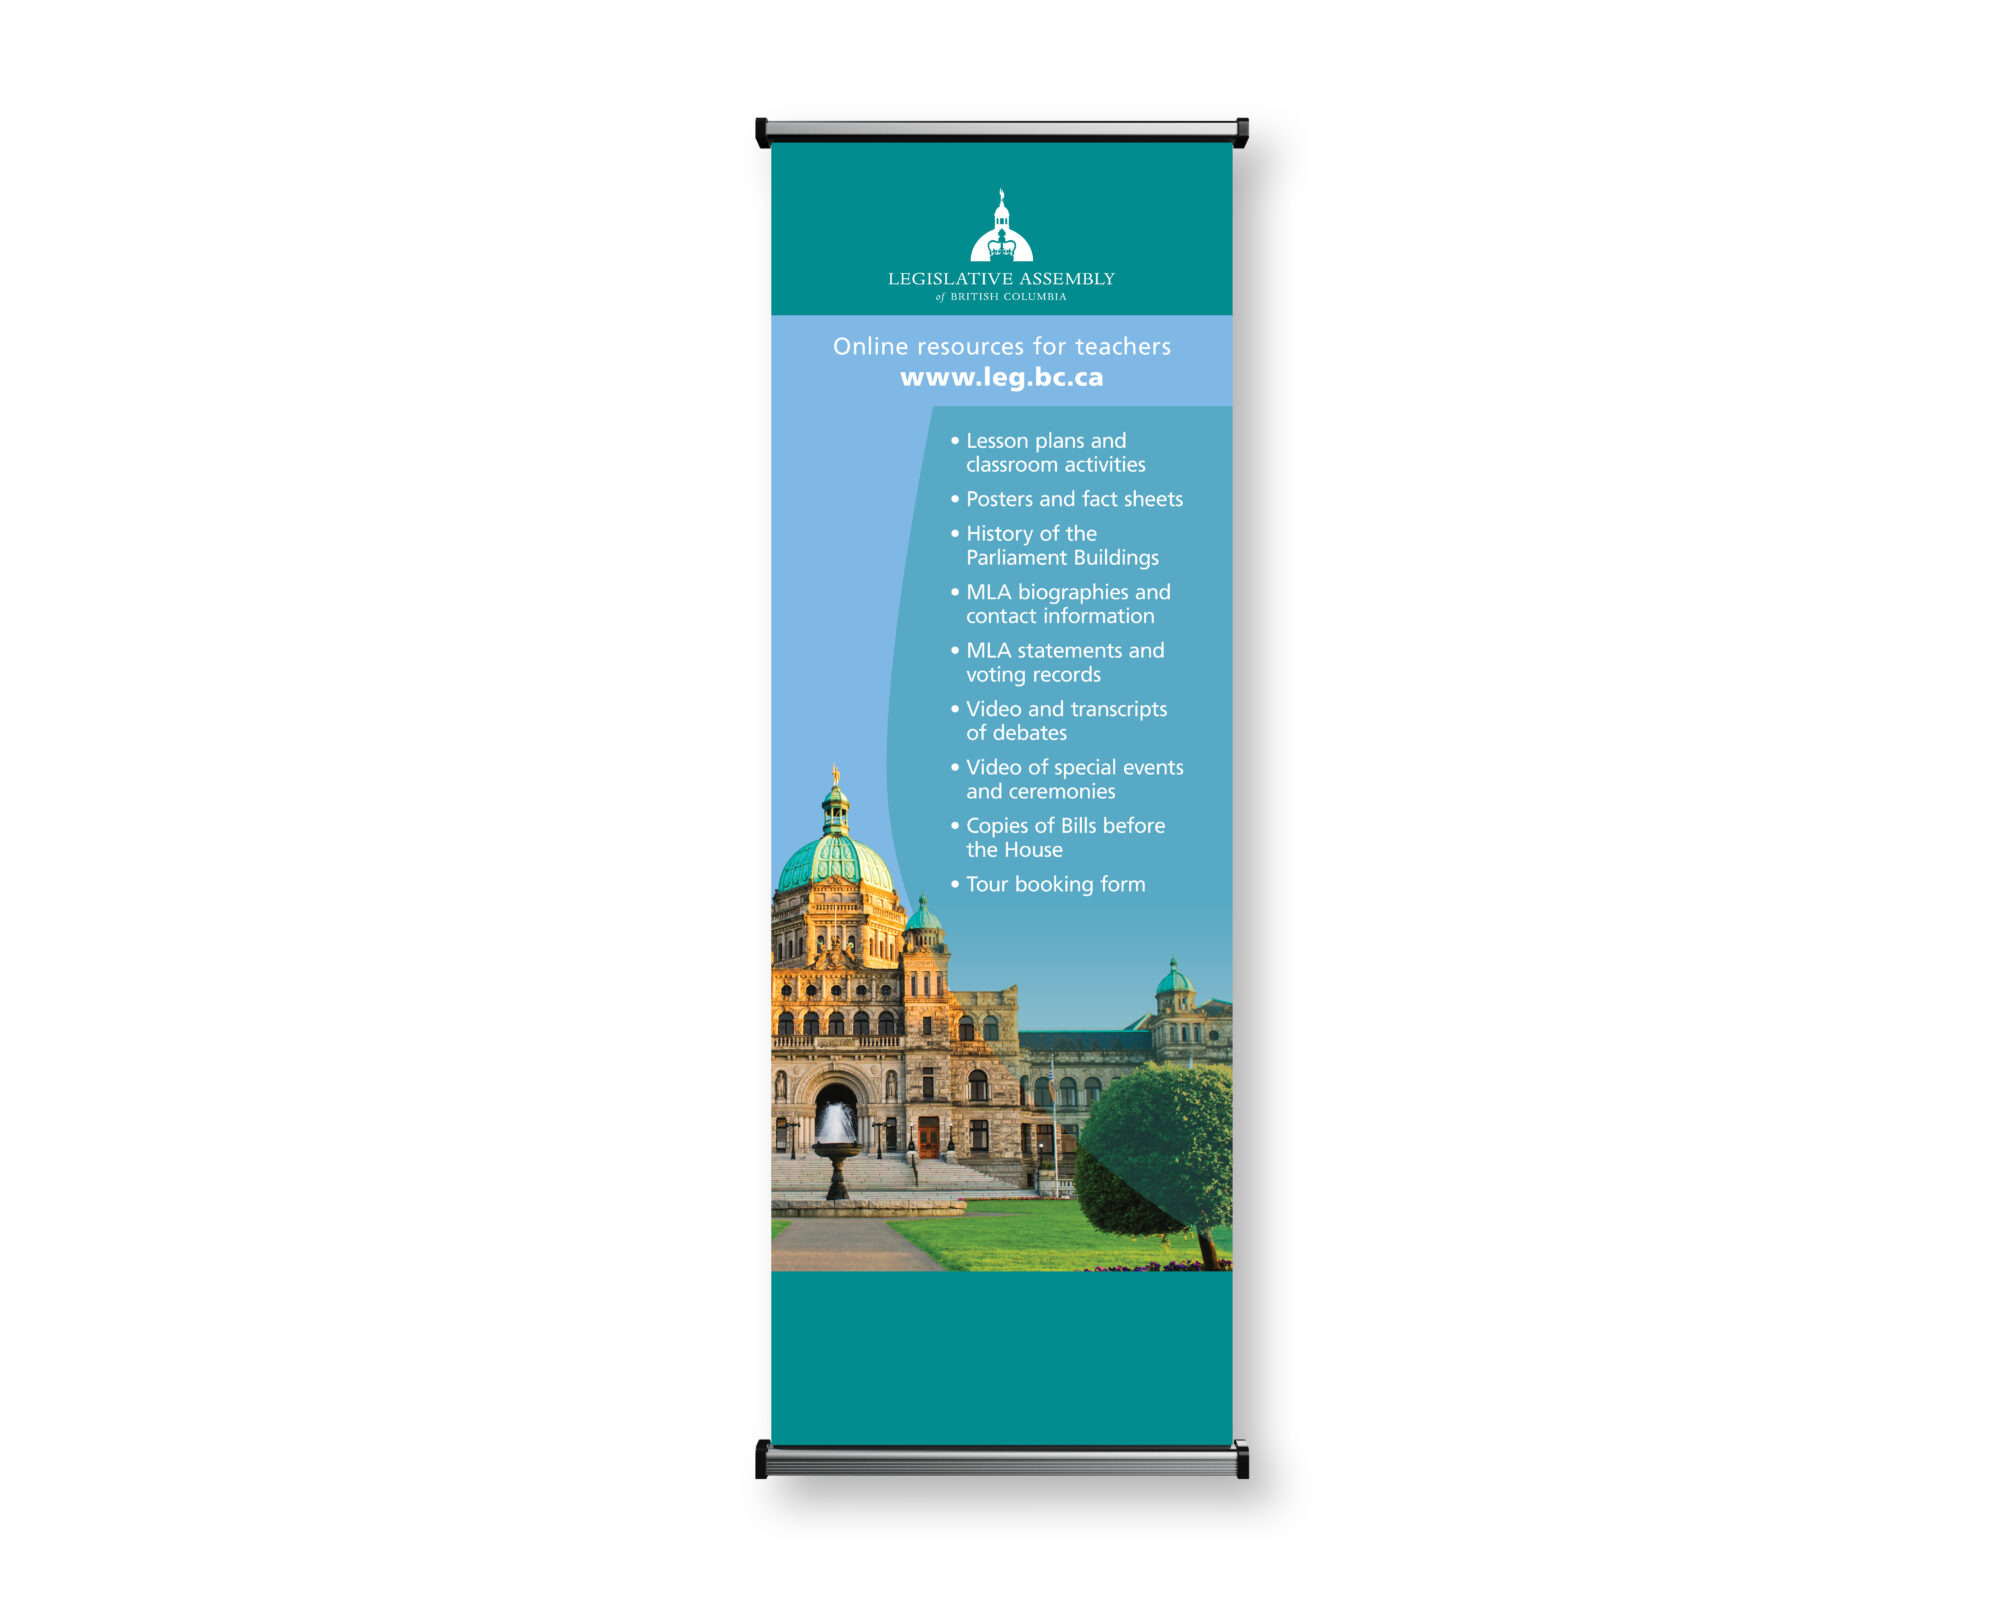 Legislative Assembly of British Columbia - Public Education Outreach Educational Programs Pop Up Banner